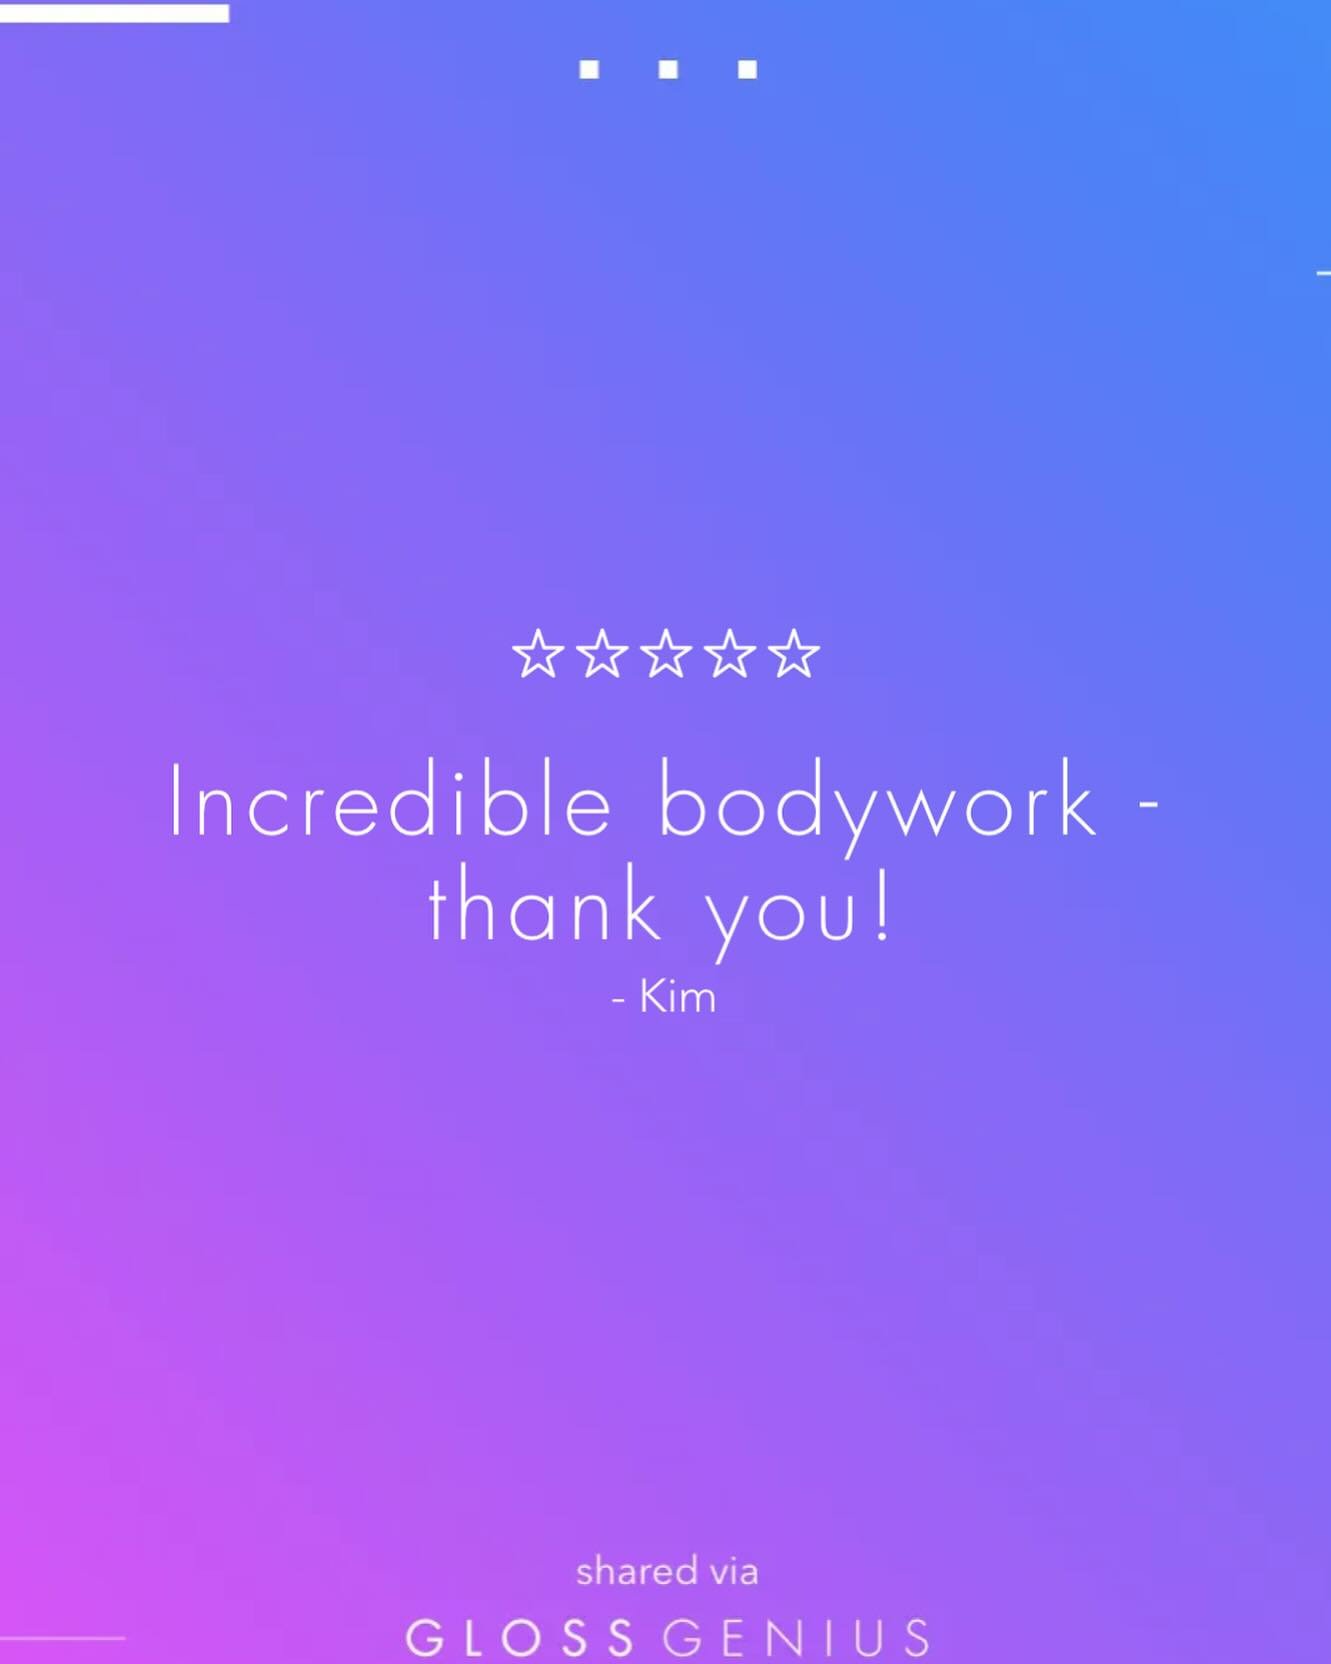 Thank you Kim!!! Wishing you calming, unwinding, relaxing days until we work together again!

Request your next session at holisticbodywork.glossgenius.com! ❤️✨
.
.
.
#bodywork #massagetherapy #holistic #somatic #bigwork #compassion #gratitude #myofa